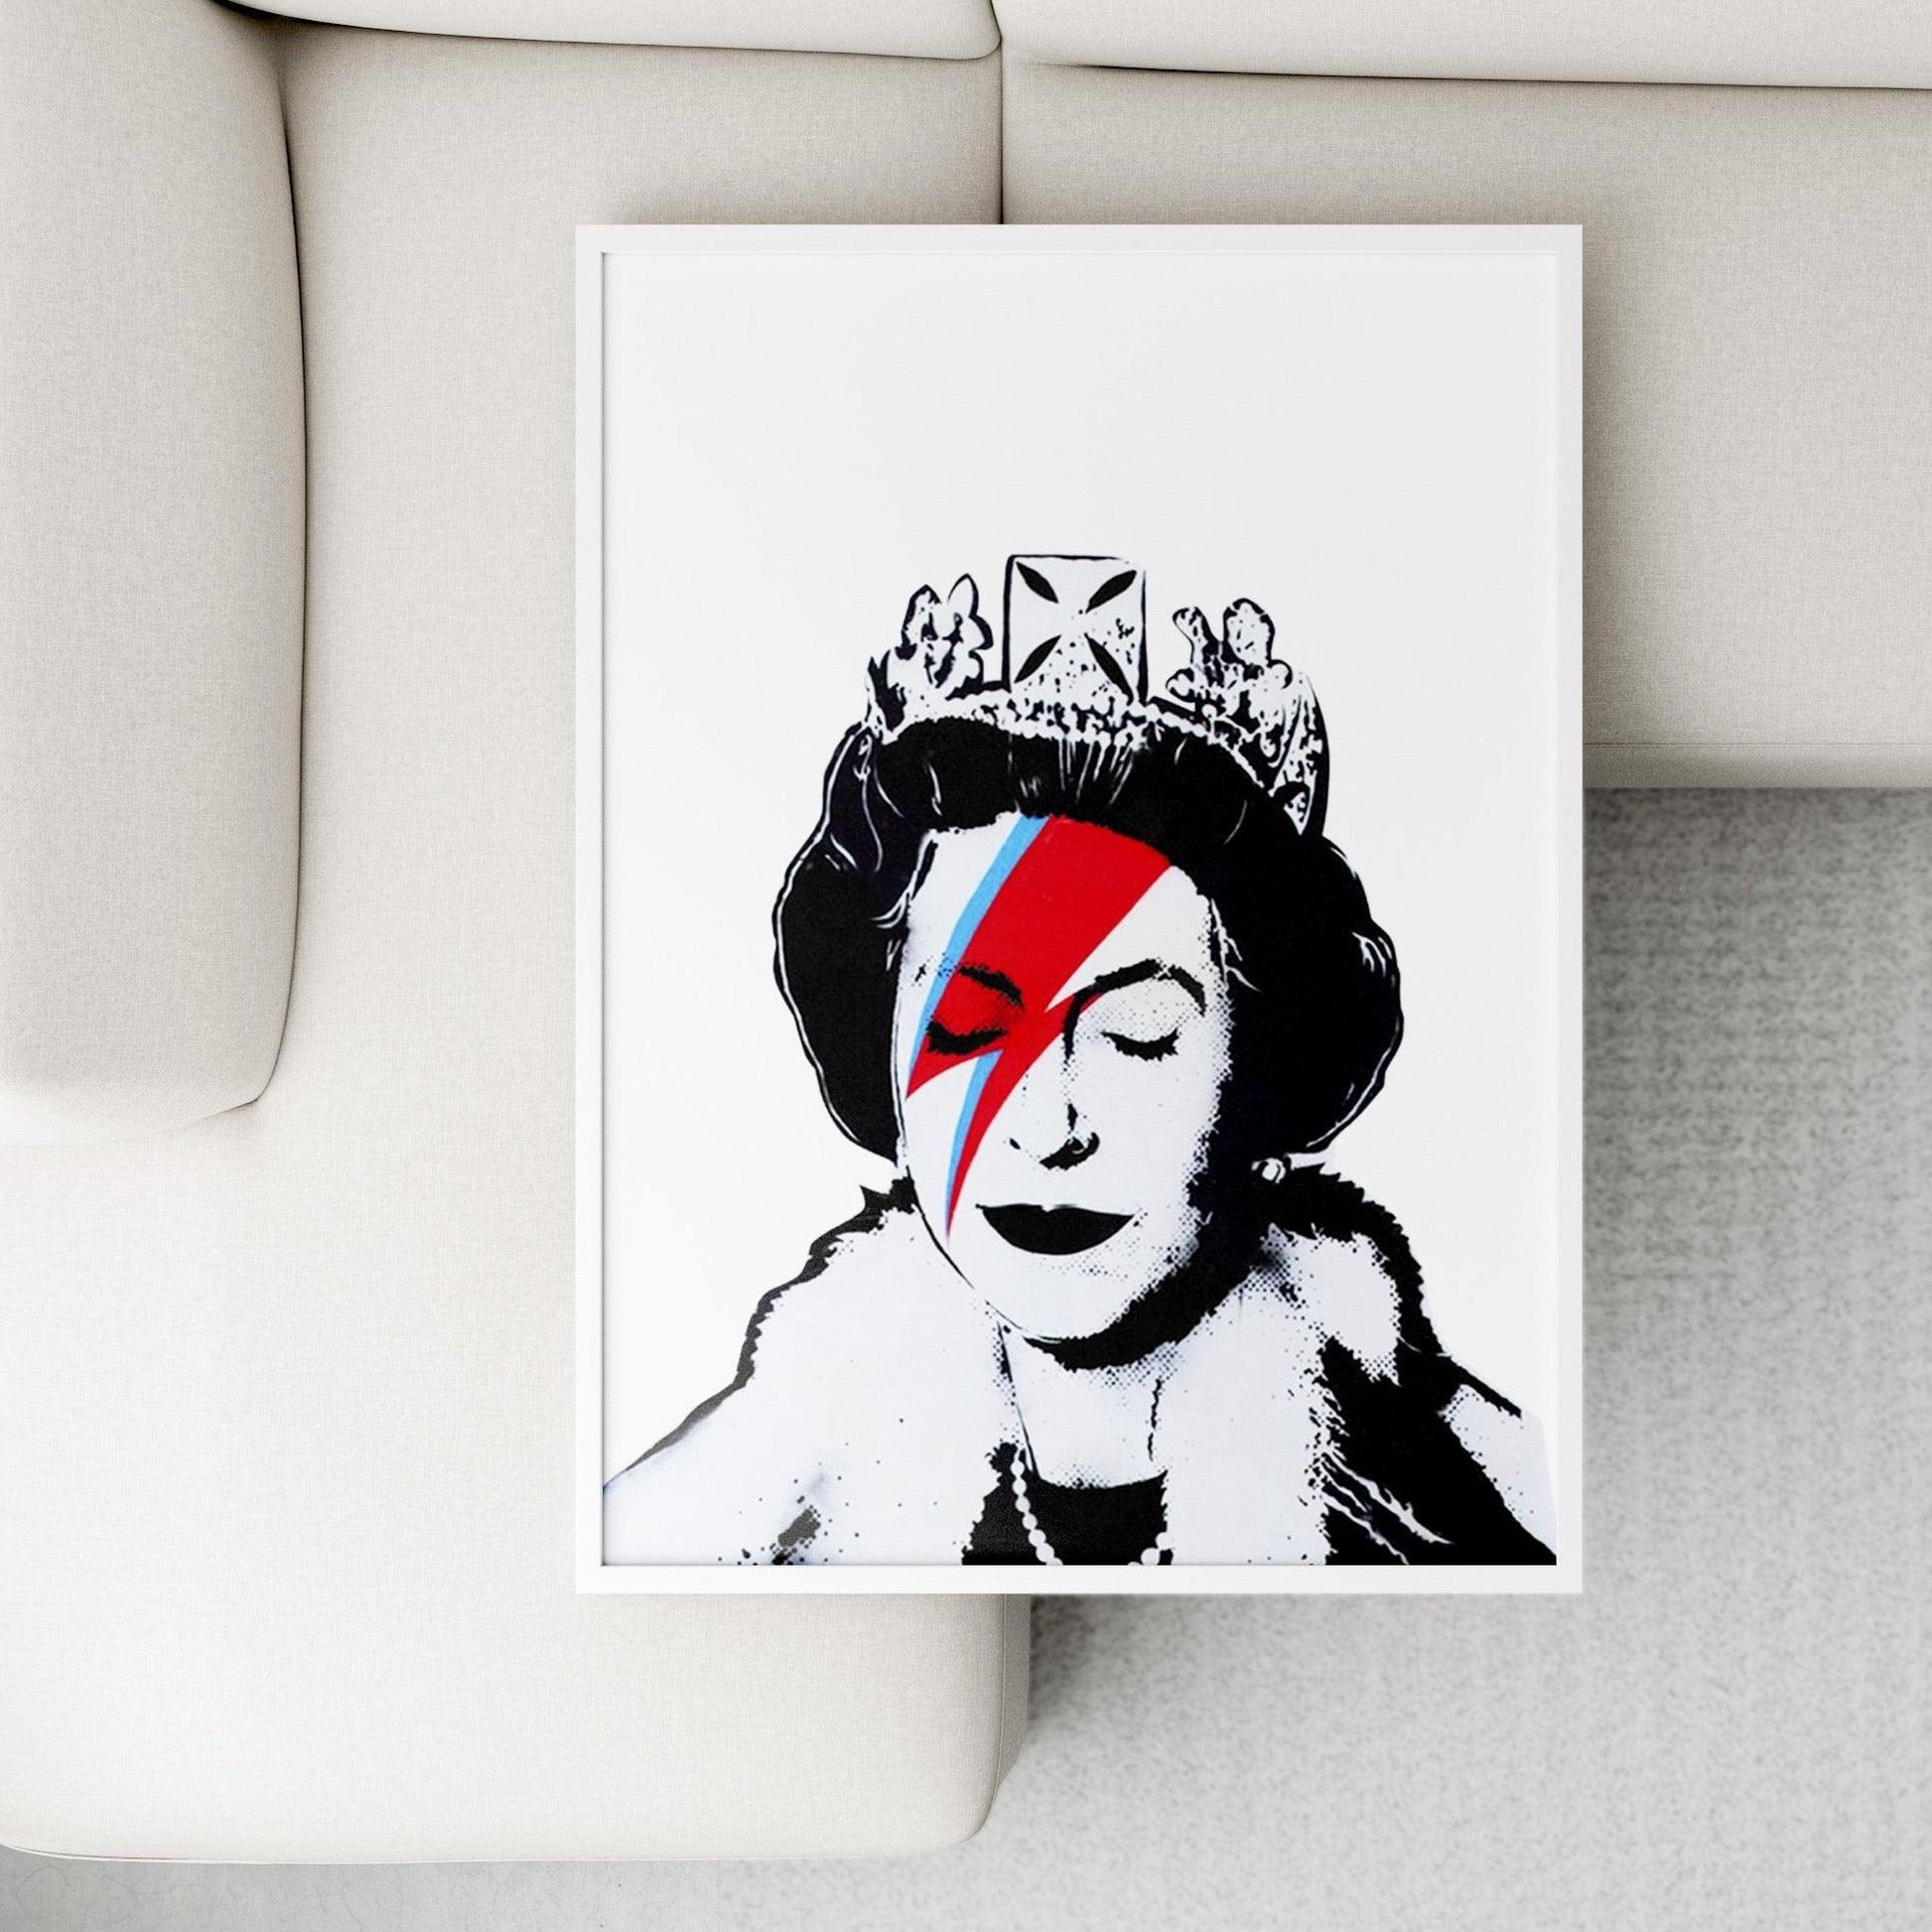 The Queen is in the house! This graffiti street art is inspired by the one and only Queen B. With a nod to the superstar's undeniable cool, this street art is an instant classic. Hang this street art in your home and get inspired to greatness.- 98types